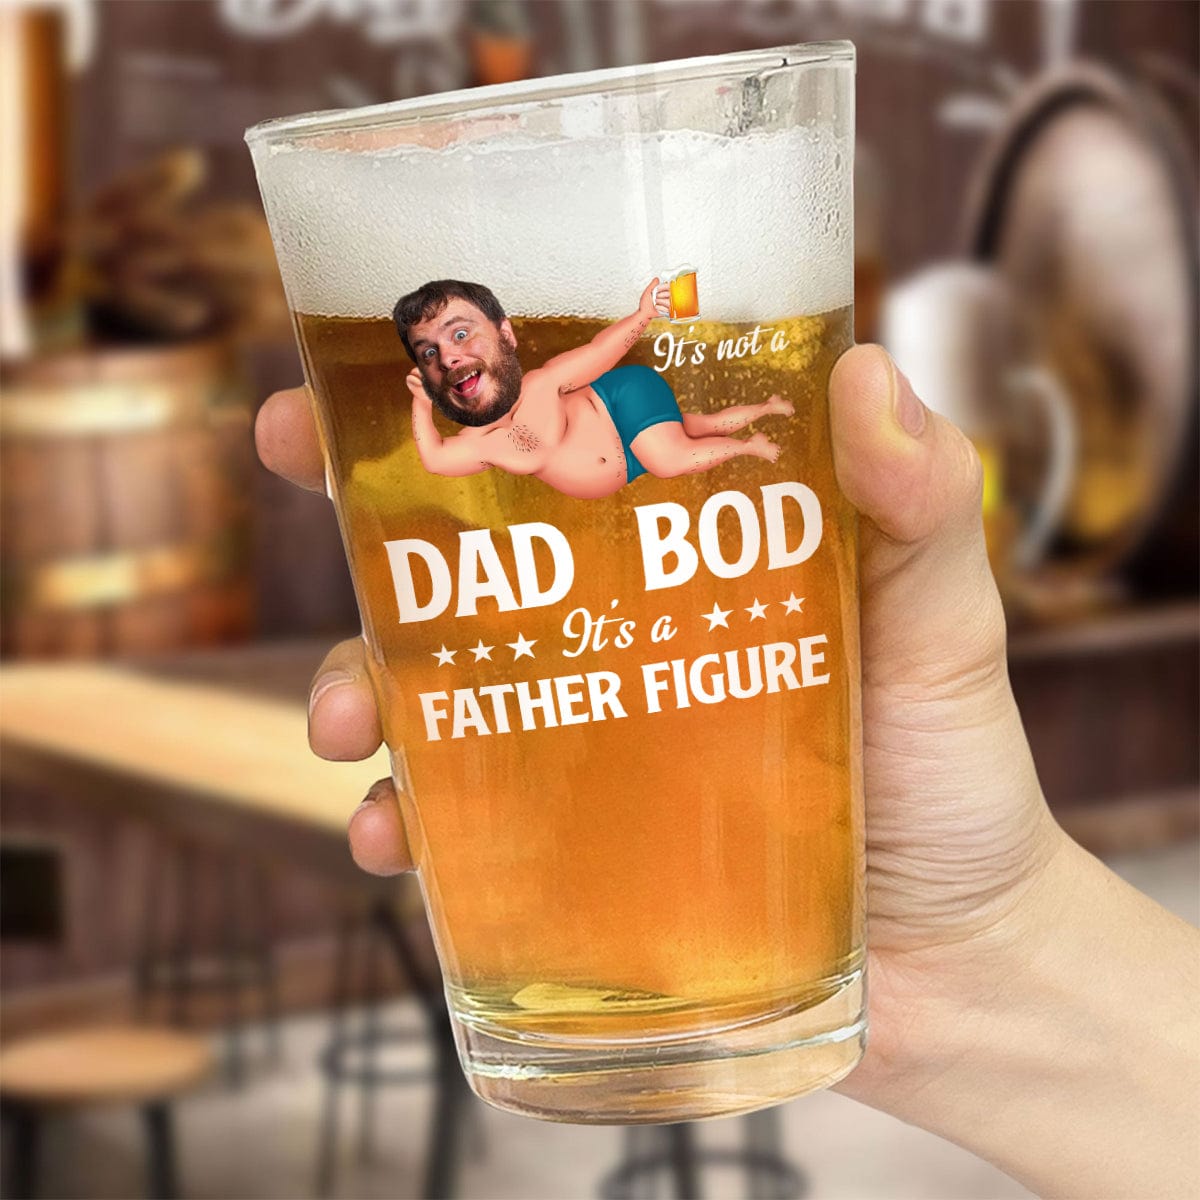 GeckoCustom Custom Photo It's Not A Dad Bod It's A Father Figure Funny Print Beer Glass HO82 890552 16oz